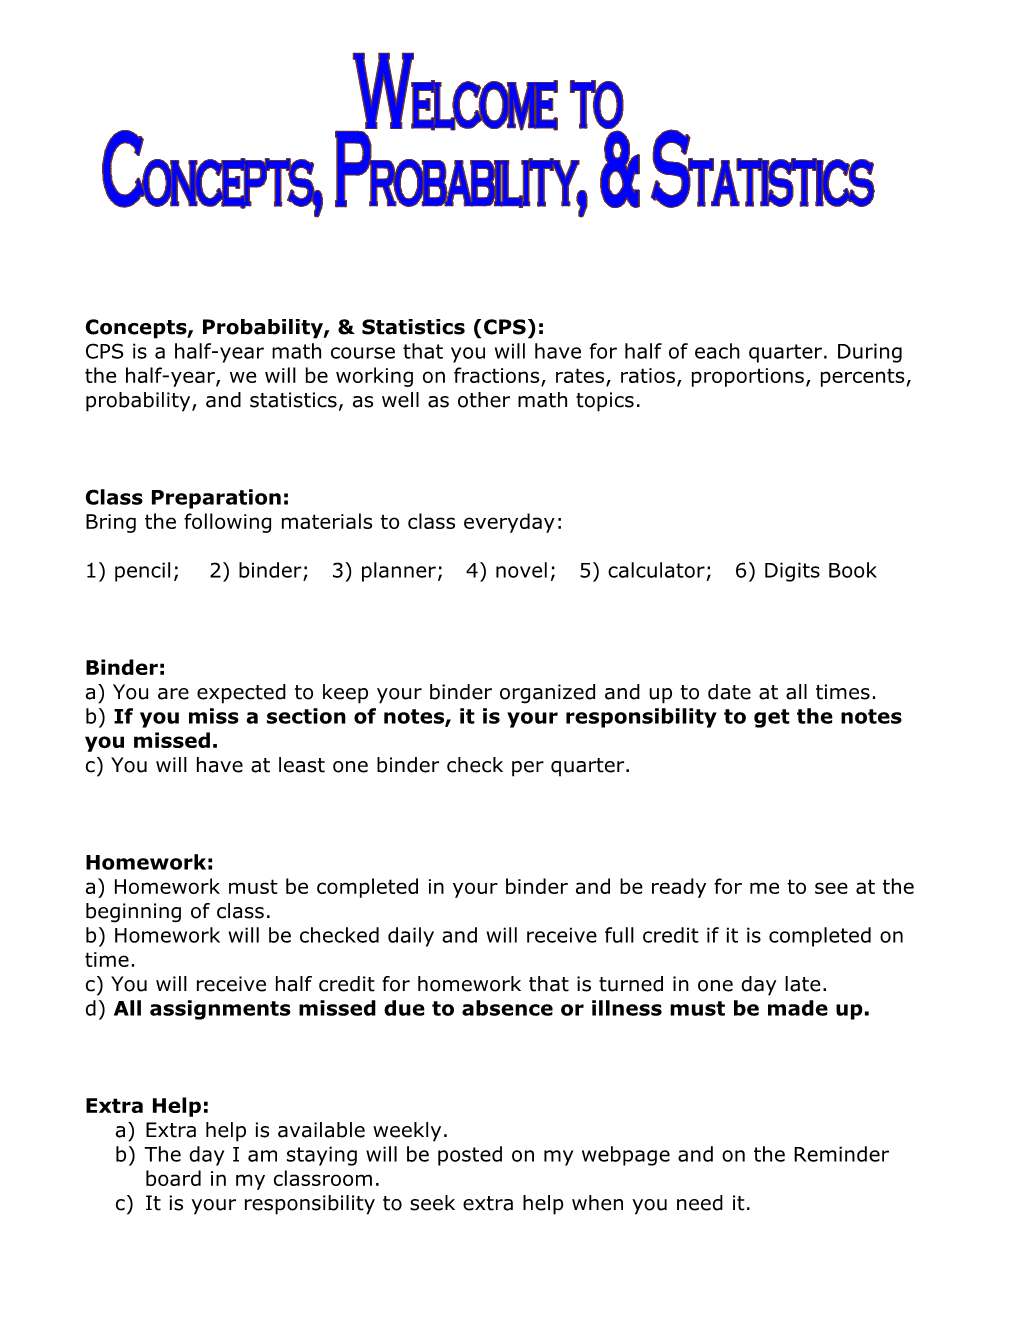 Concepts, Probability, & Statistics (CPS)